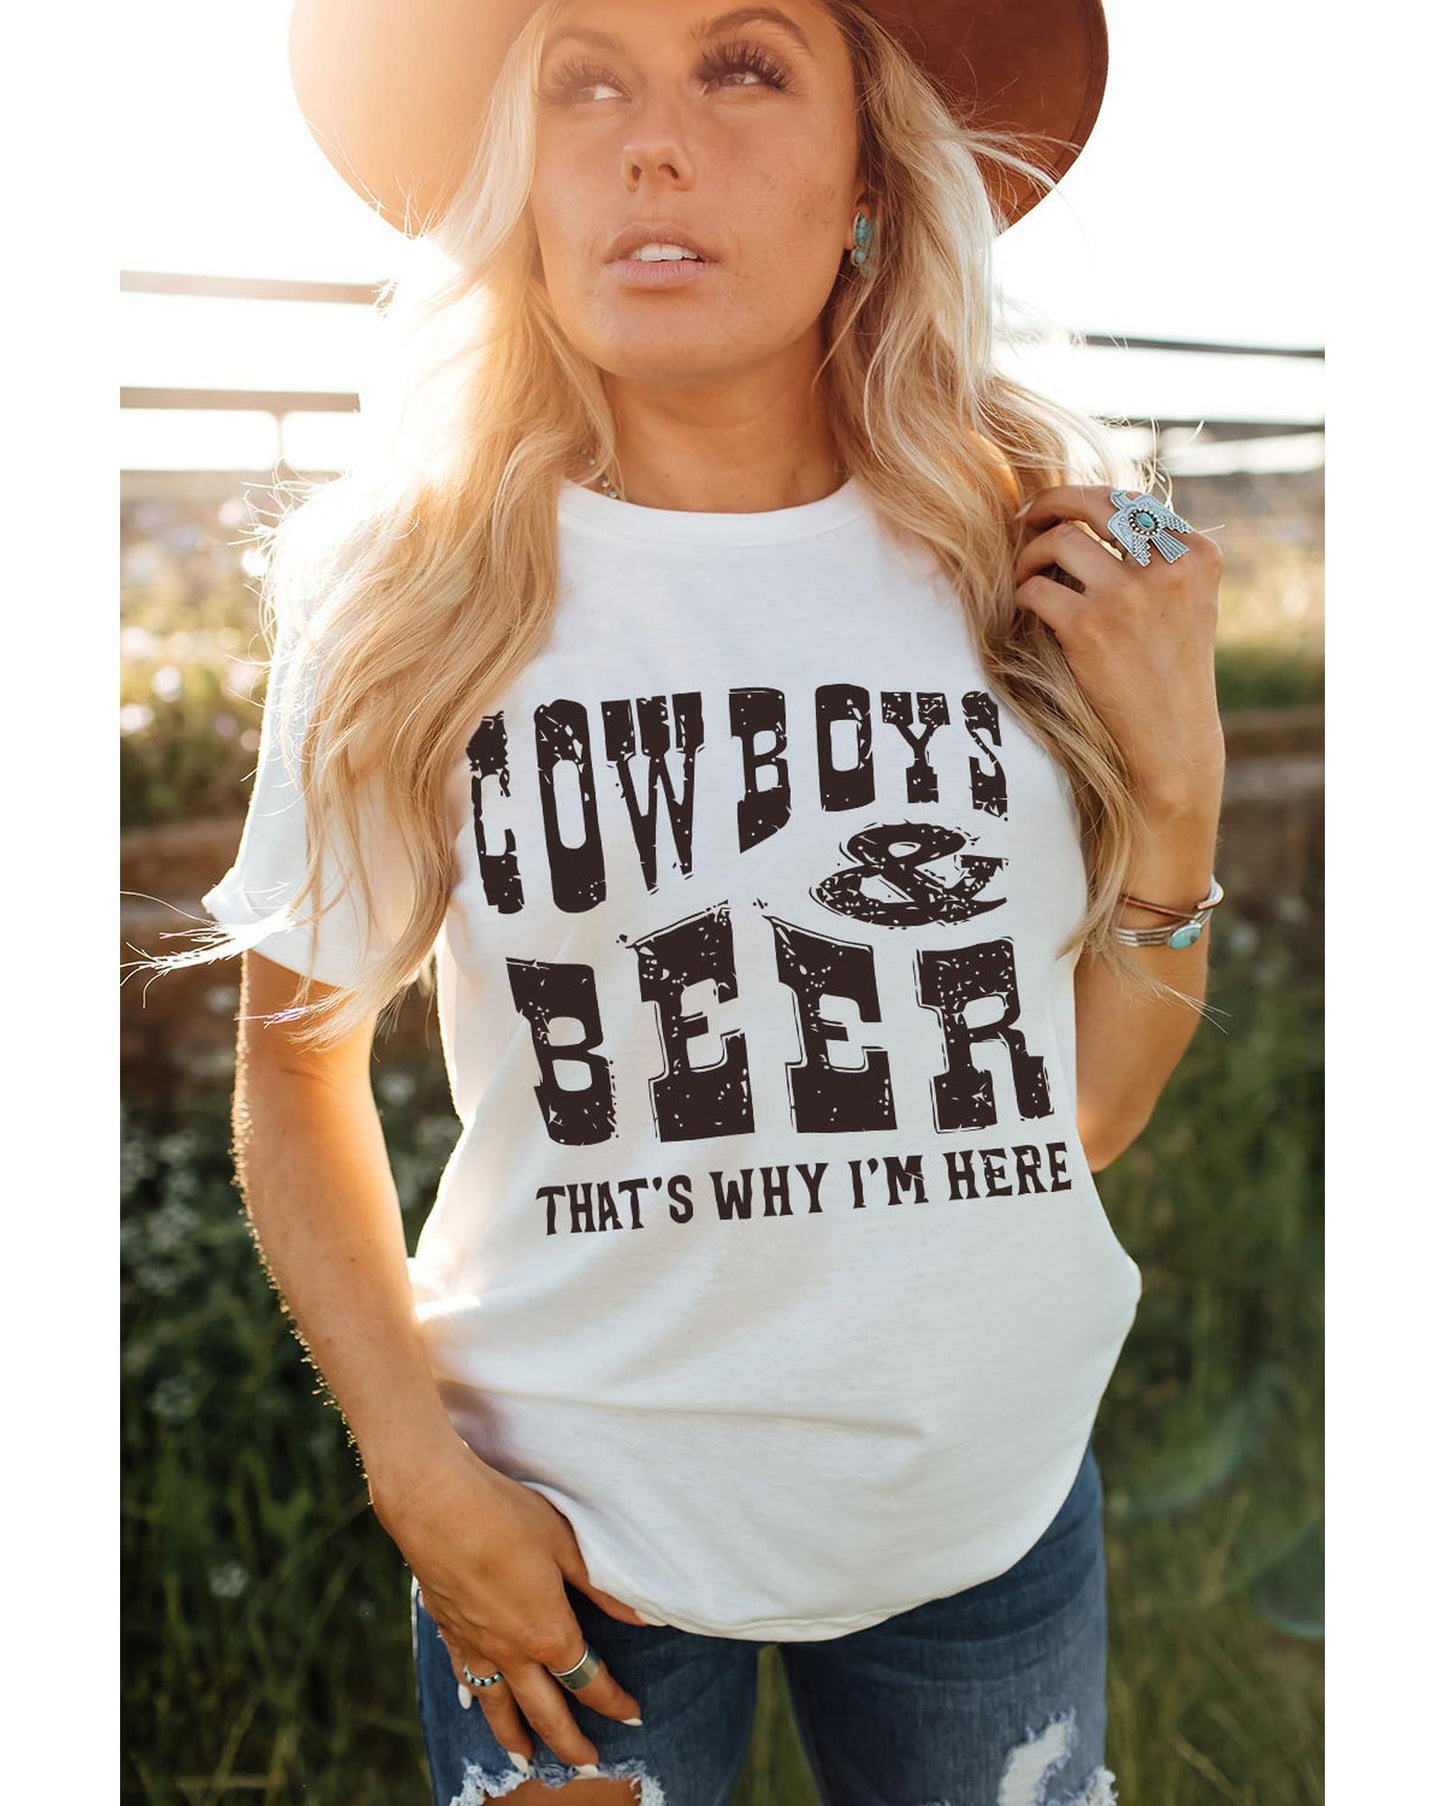 Azura Exchange COW BOYS & BEERS Letters Graphic T-shirt - XL